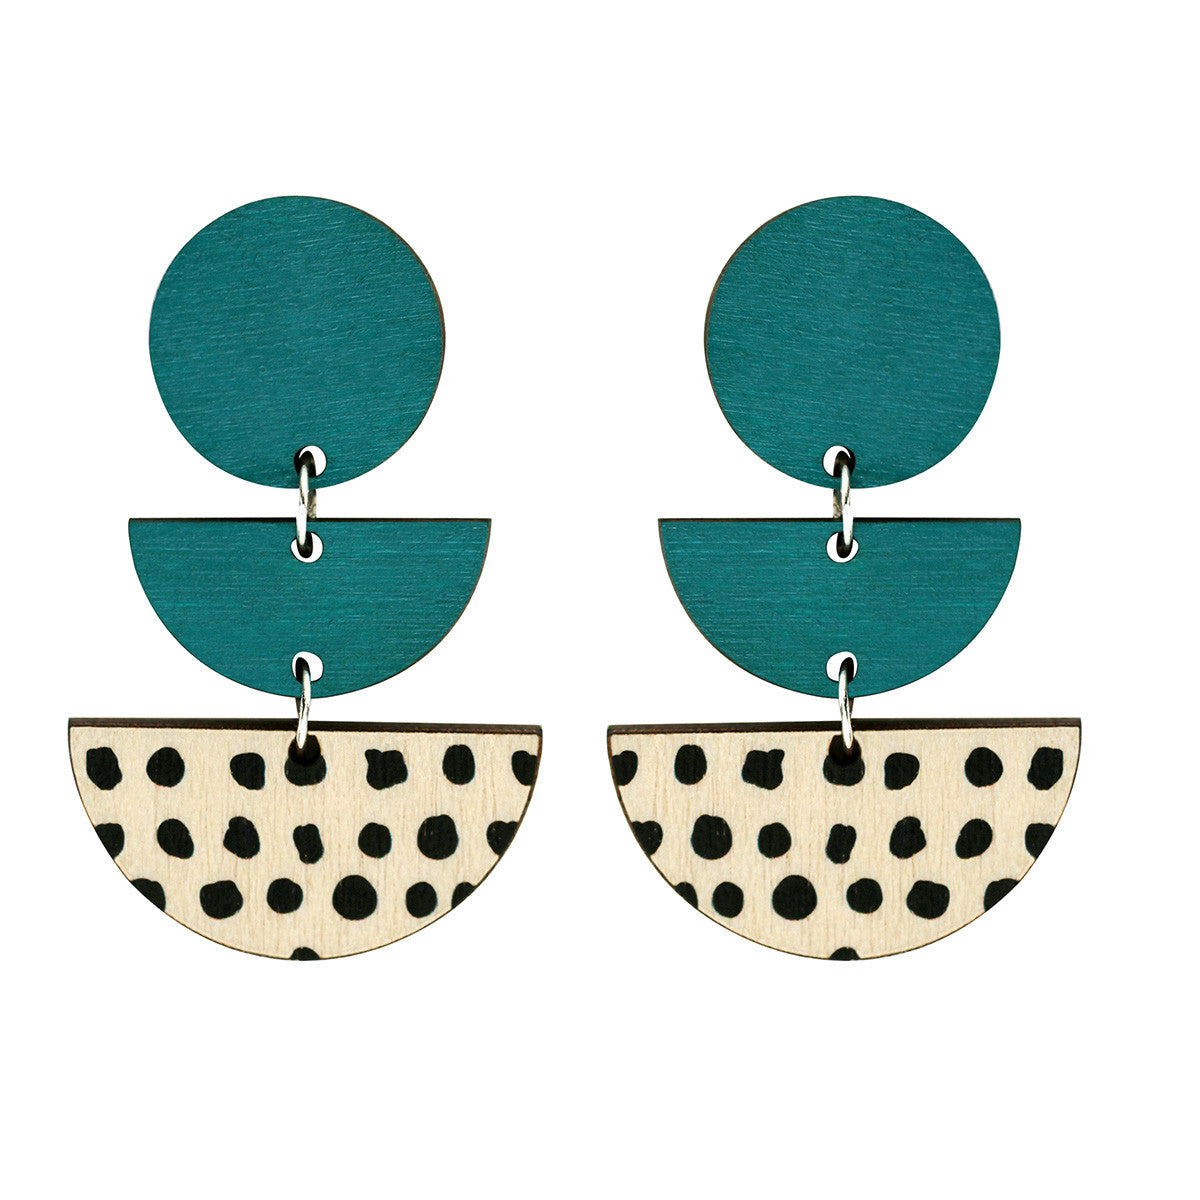 3 tiered earrings with spots in green